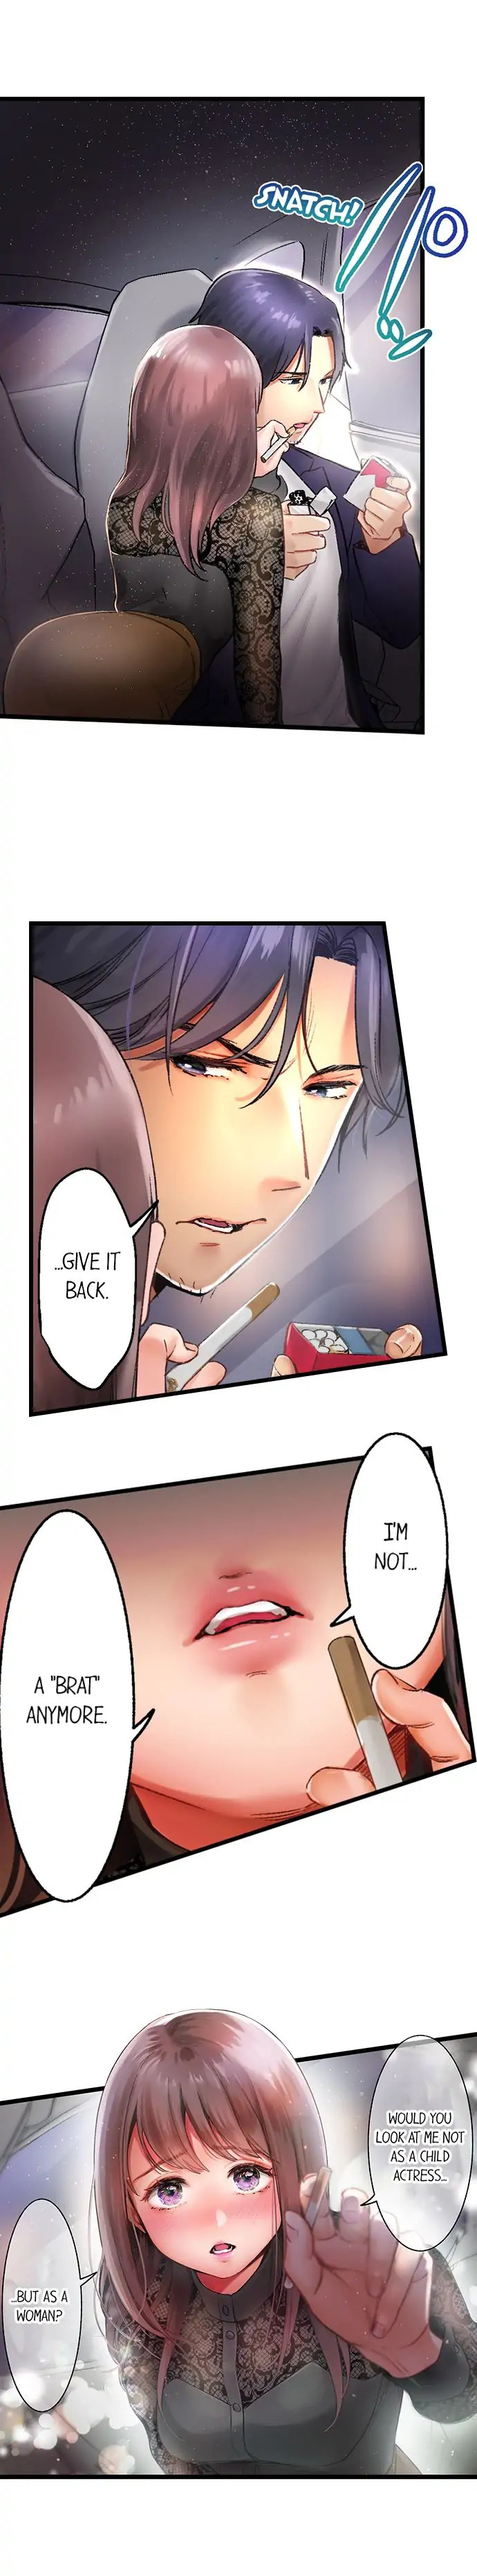 Show Me What Comes After Kissing - Chapter 2 Page 7